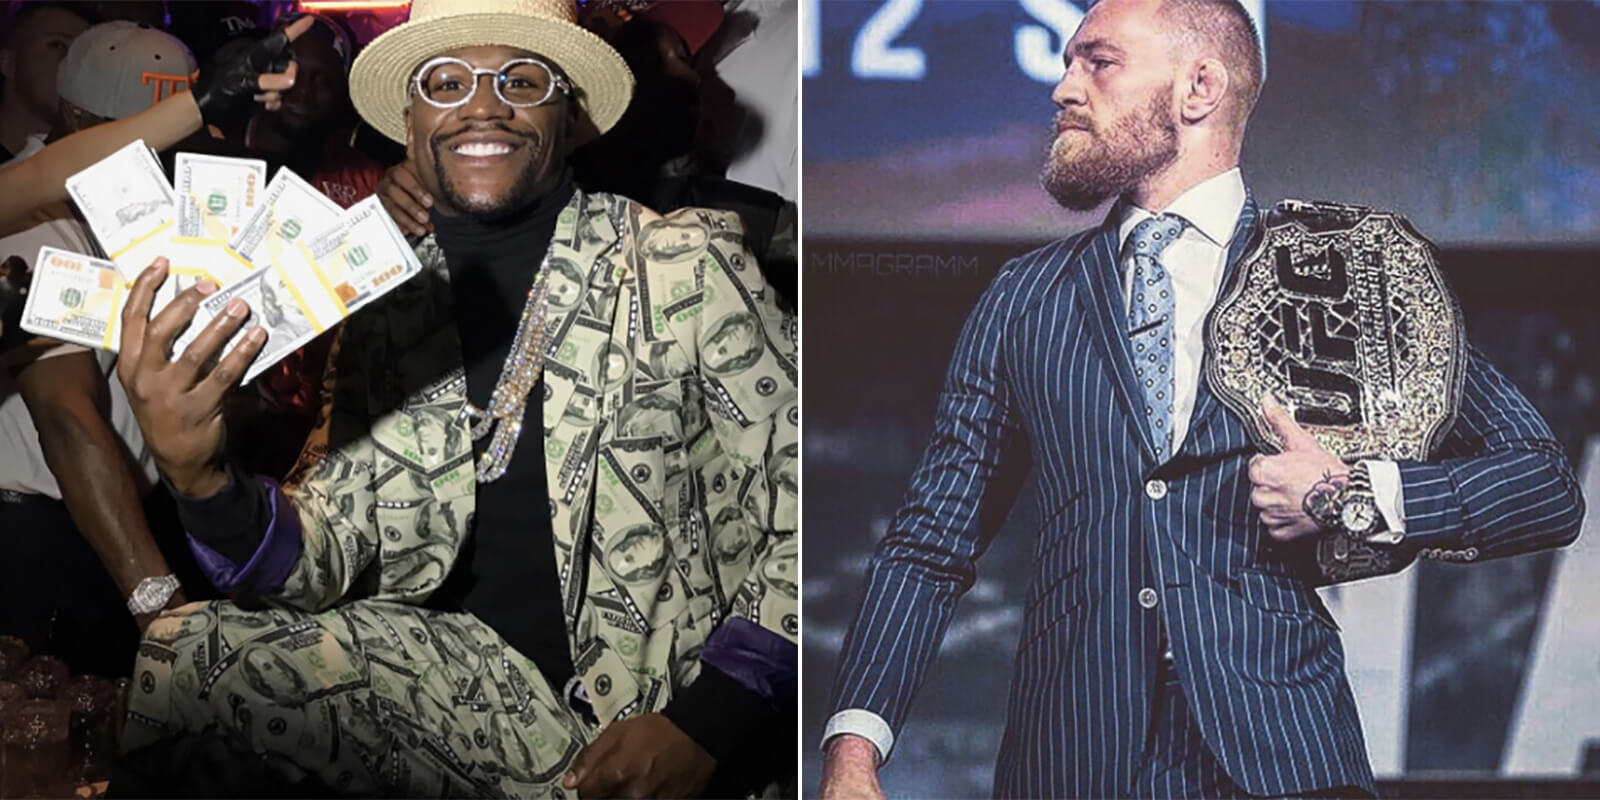 Floyd Mayweather Offers $10K On Instagram To Embarrass Conor McGregor